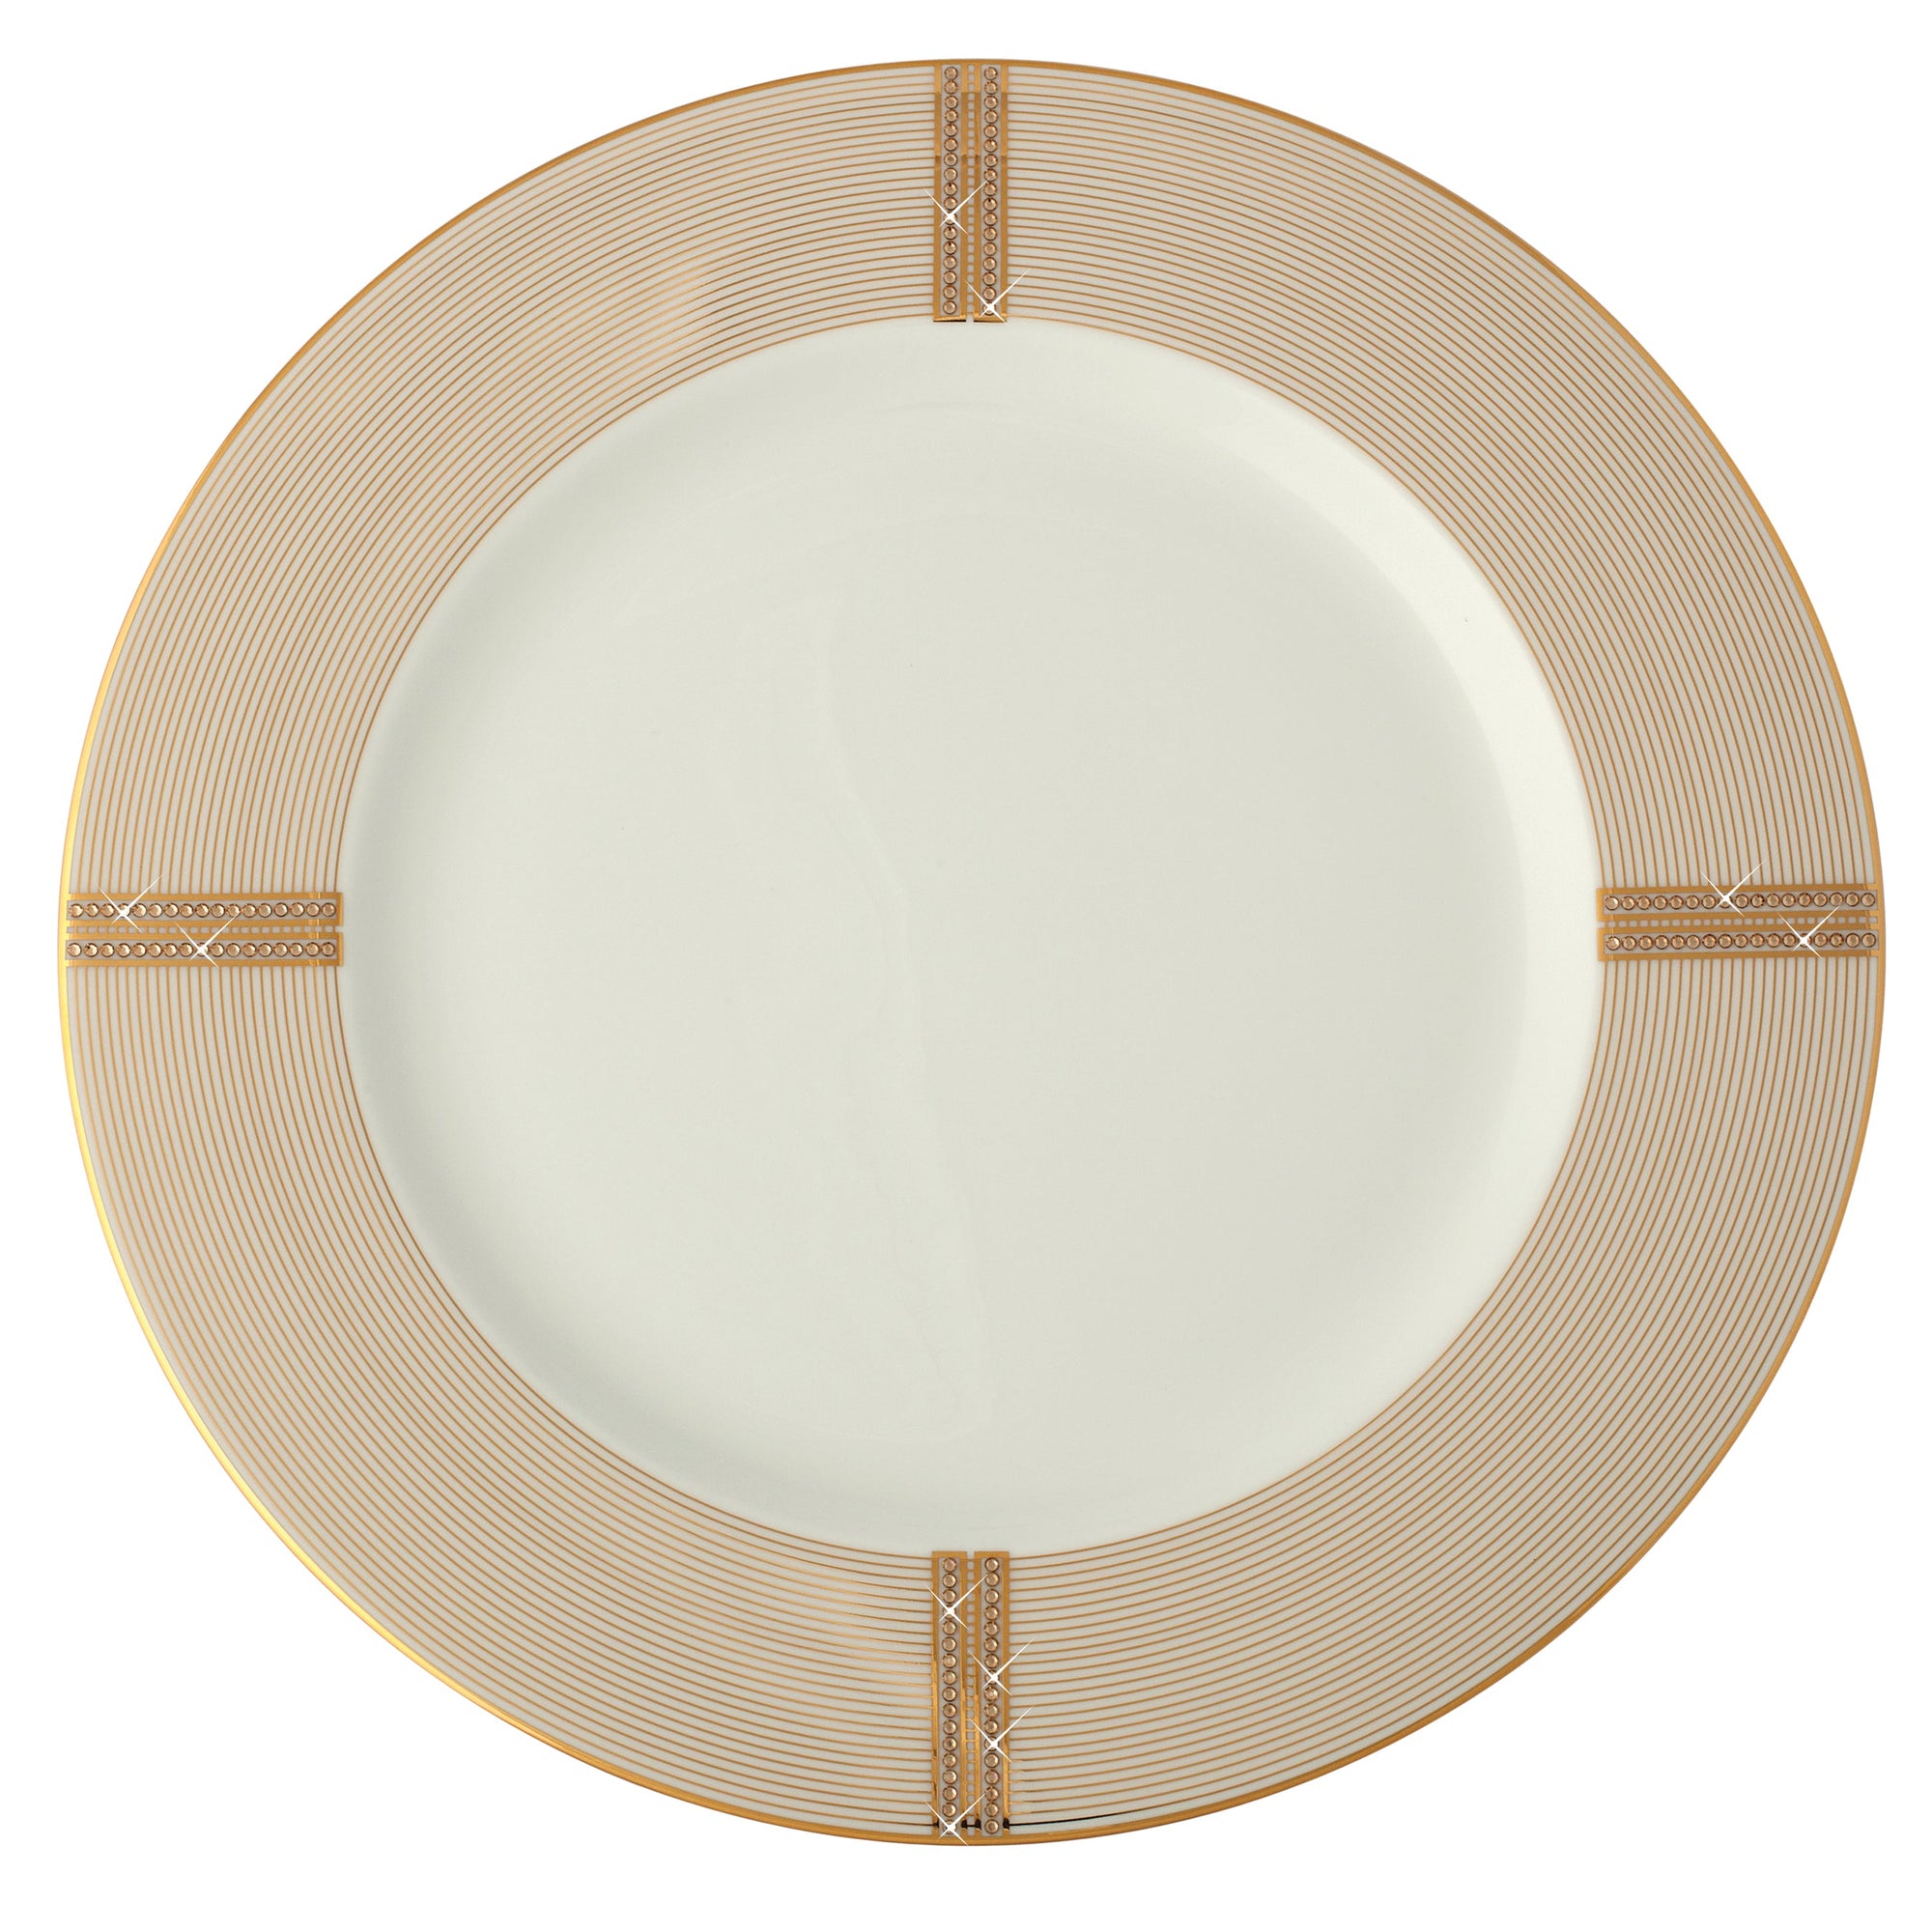 Prouna Regency Gold Charger Plate White Background Photo